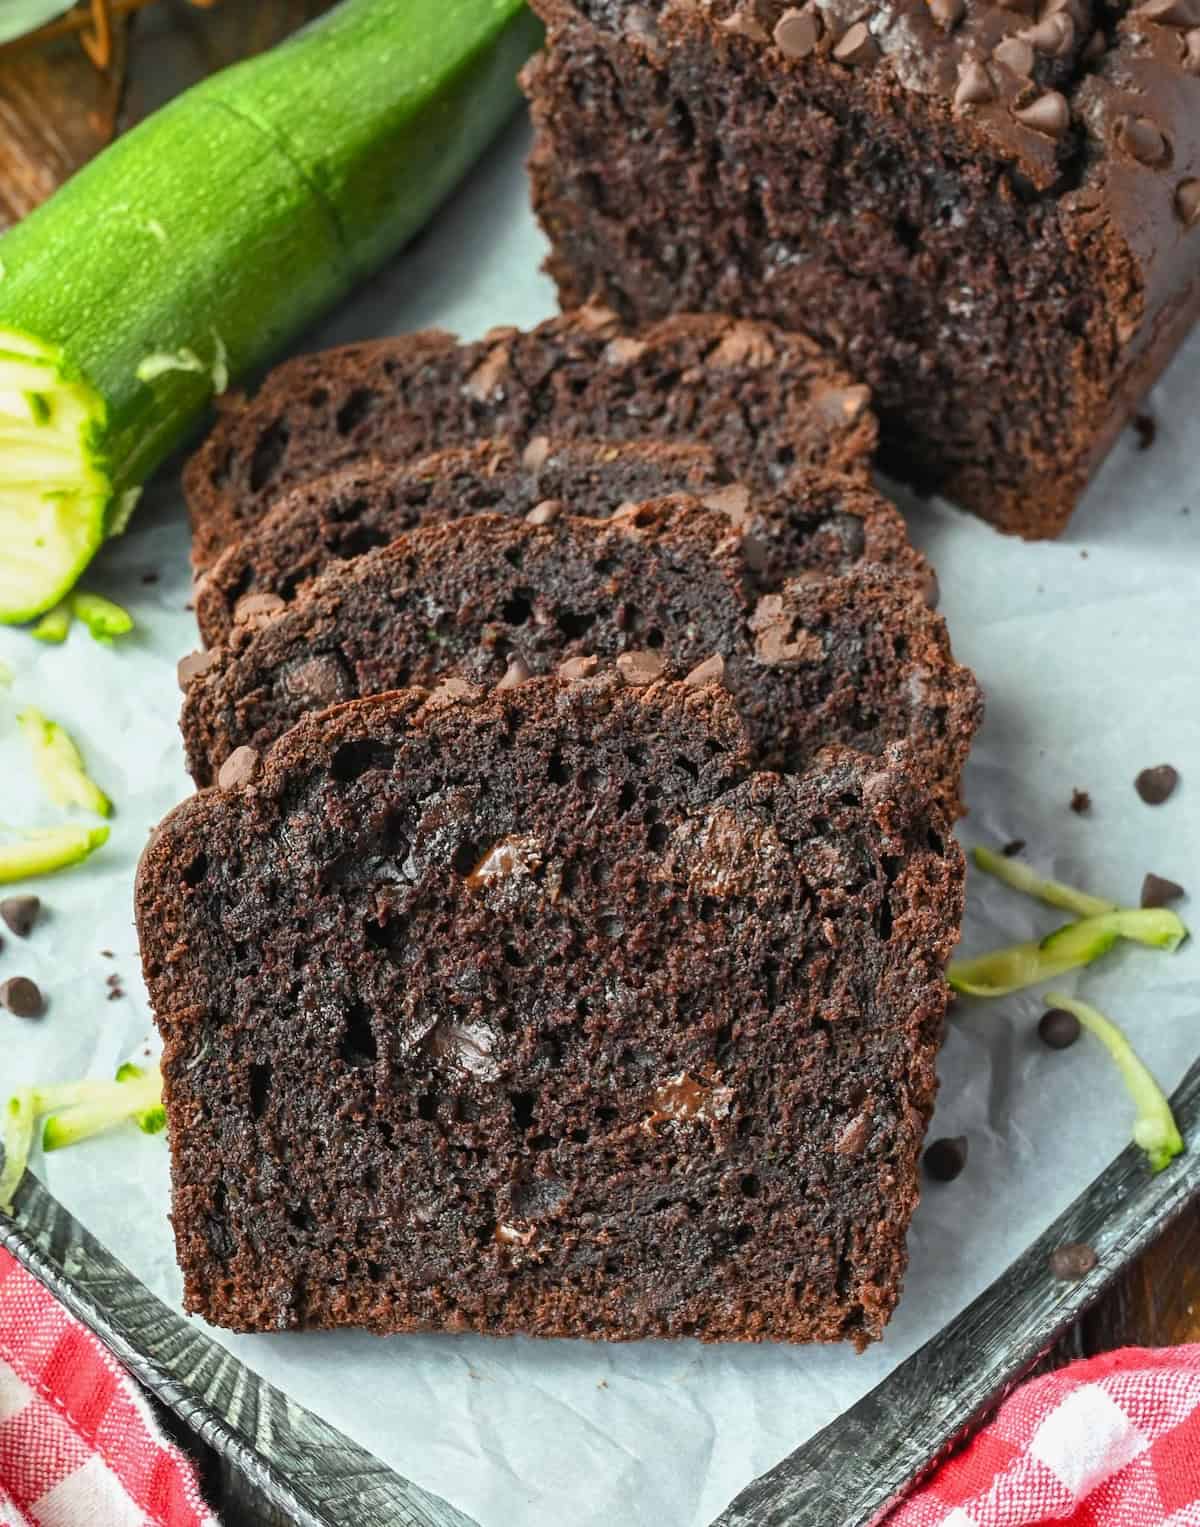 Slices of chocolate zucchini bread on a baking sheet.